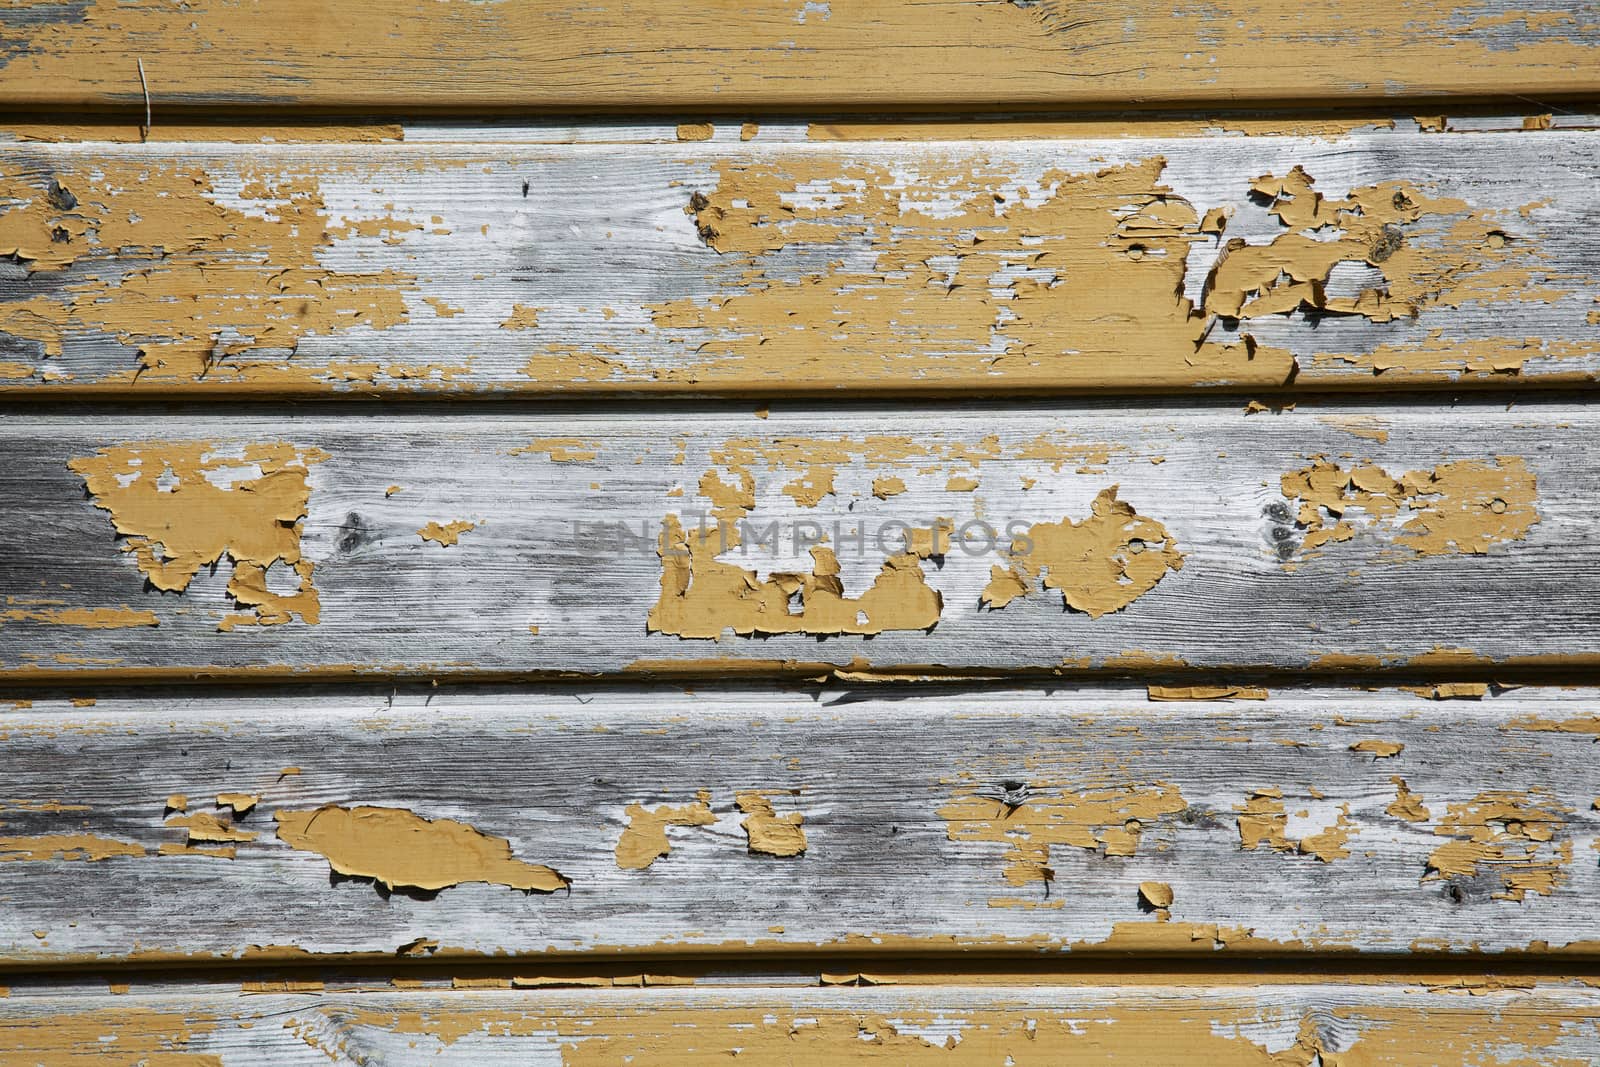 horizontal picture of old grey horizontal planks with peeling yellow ochre paint